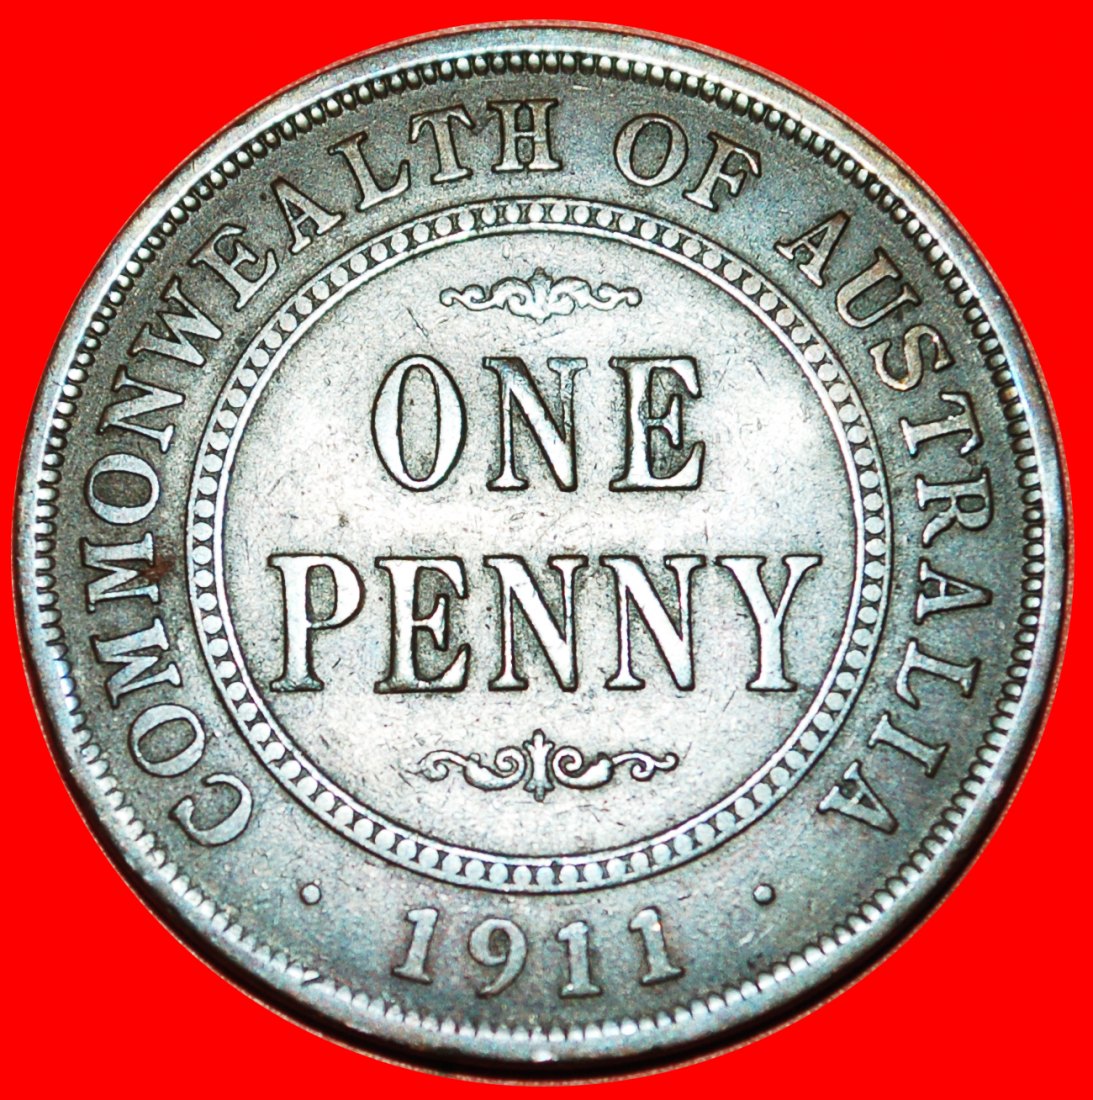  * GREAT BRITAIN: AUSTRALIA ★ 1 PENNY 1911! George V (1911-1936) LOW START ★ NO RESERVE!   